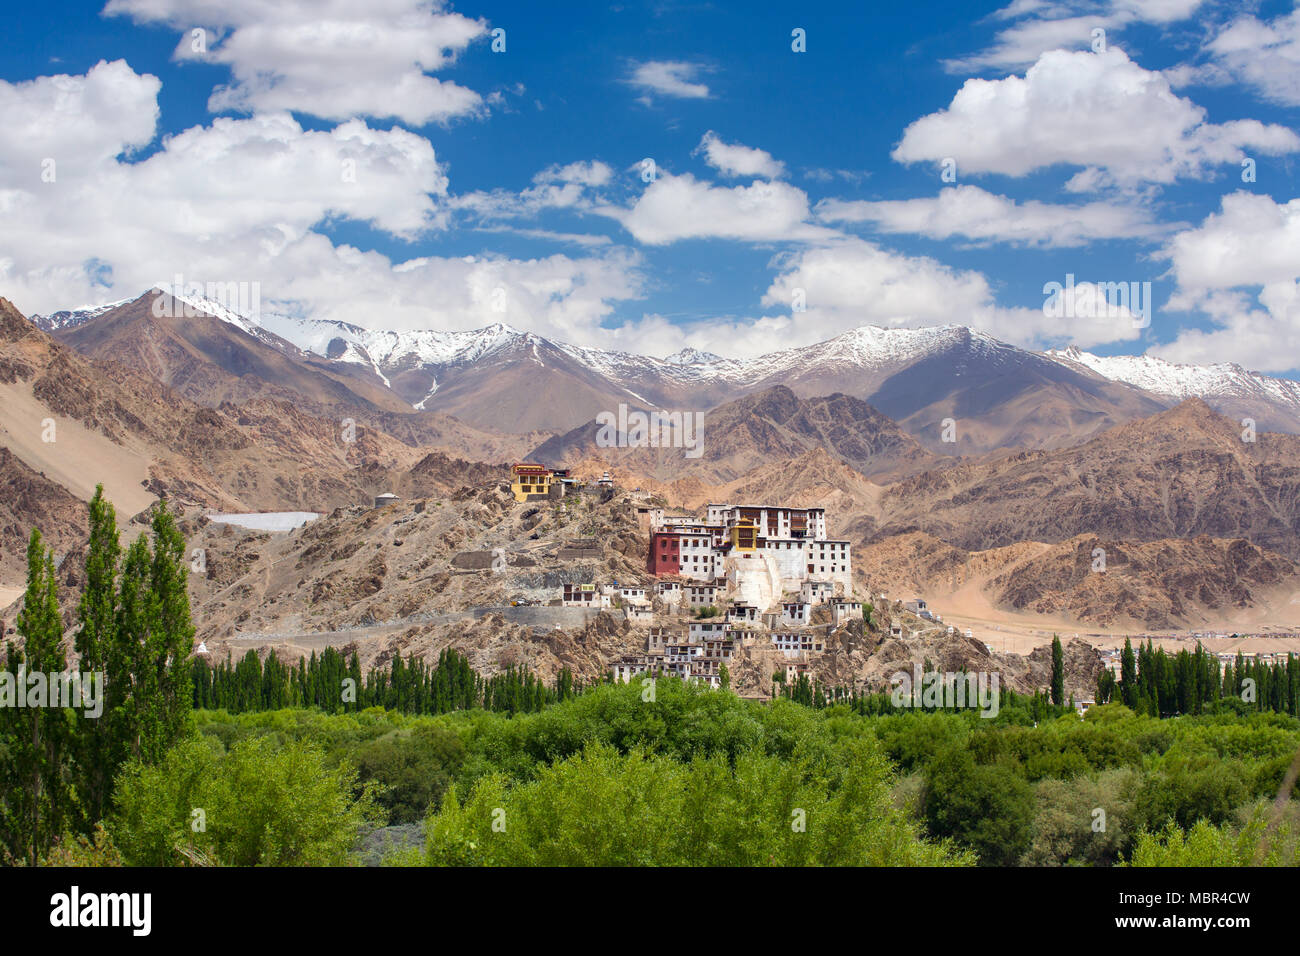 Spituk Monastery with view of Himalayas mountains. Spituk Gompa is a famous Buddhist temple in Ladakh, Jammu and Kashmir, India. Stock Photo